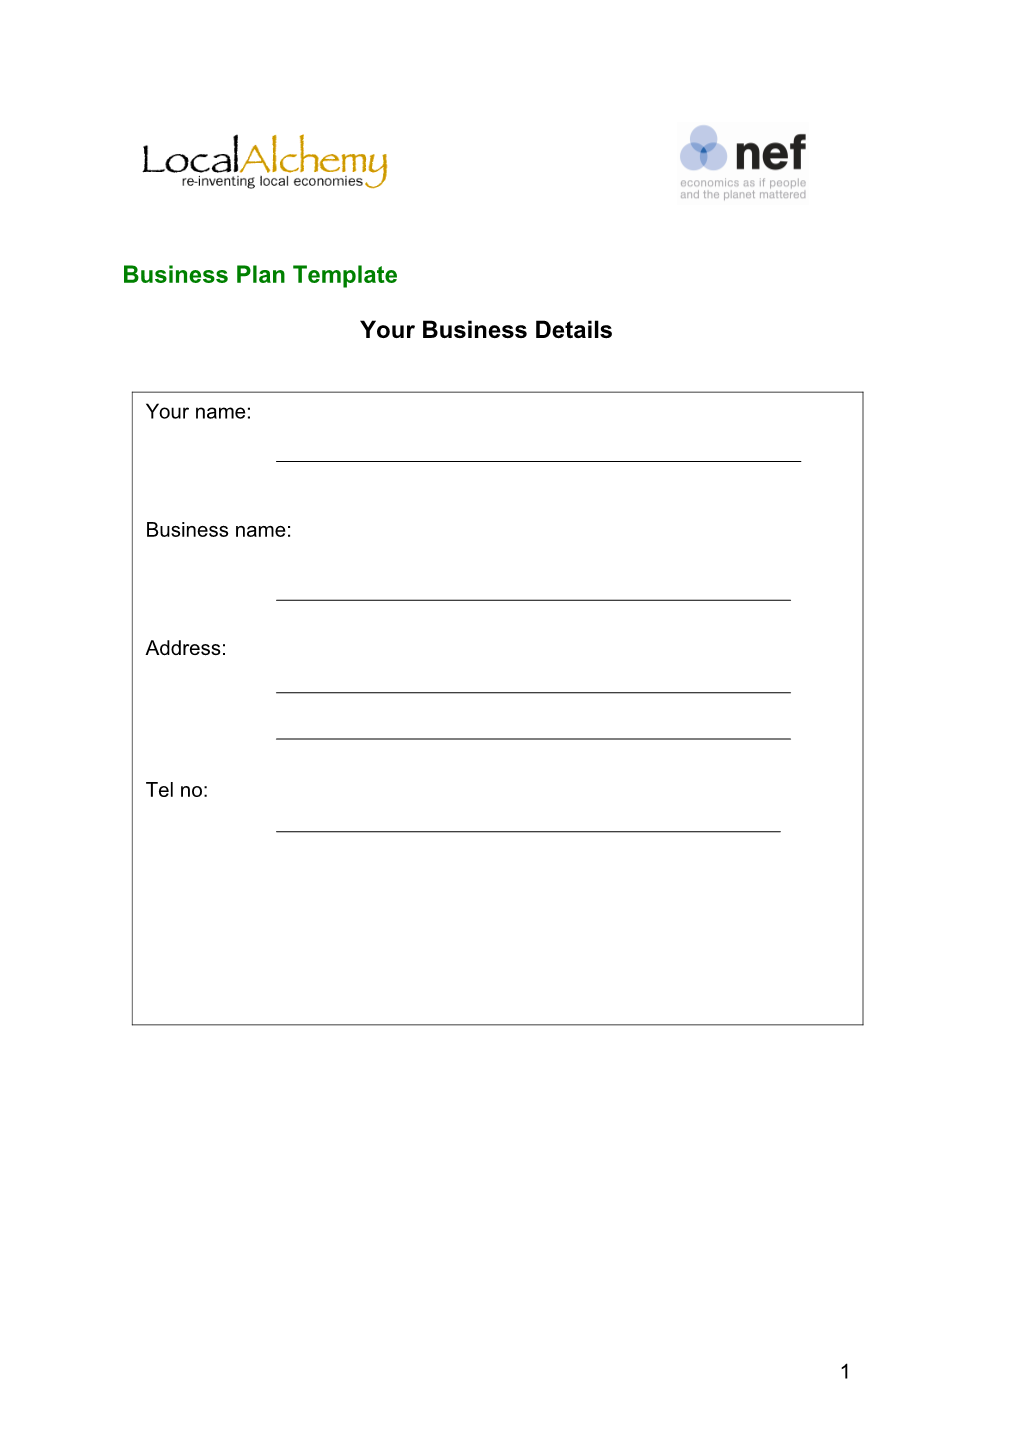 Your Business Details